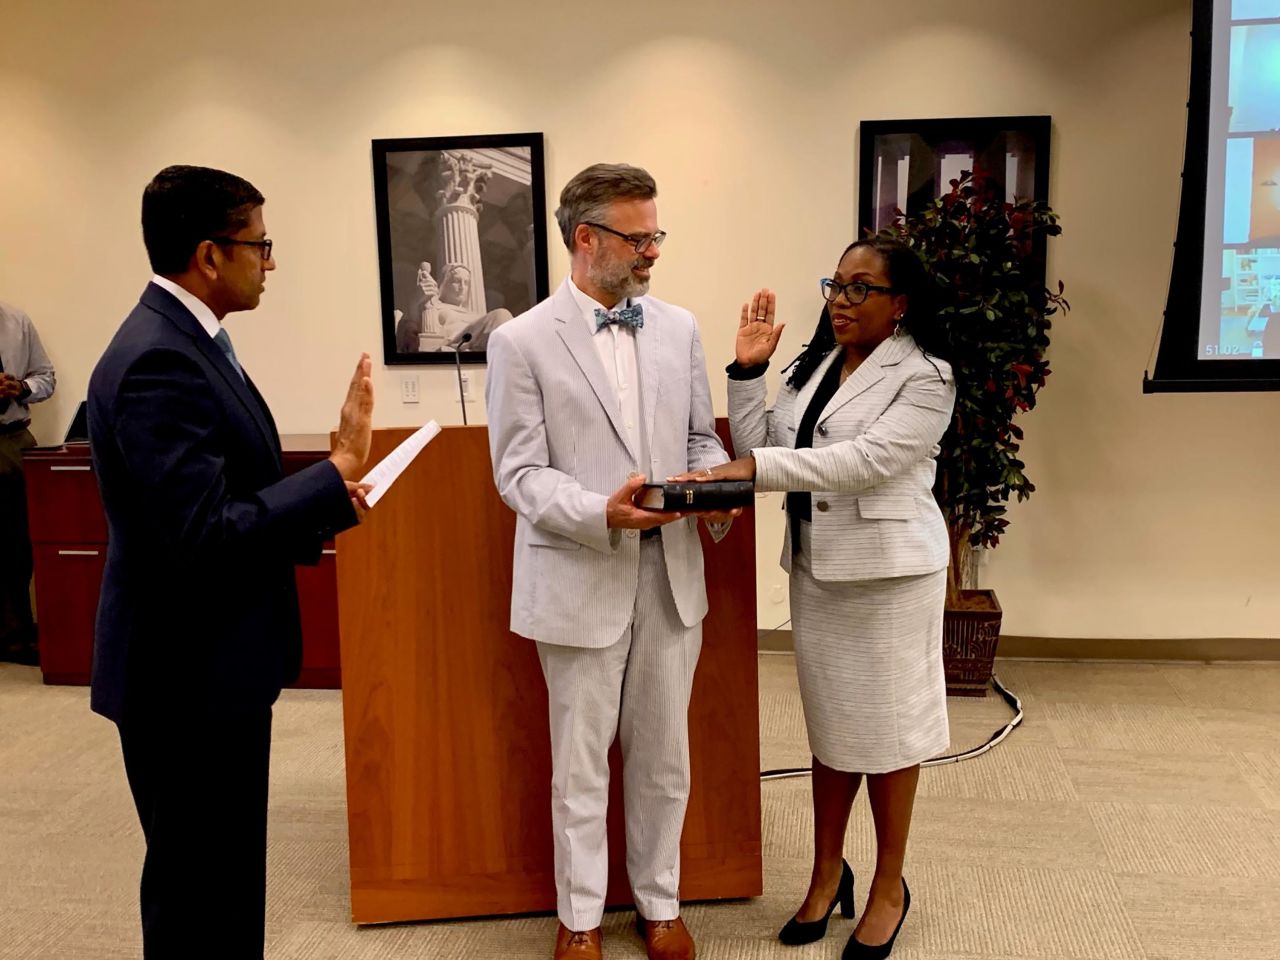 Jackson is sworn in by Chief Judge of the United States Court of Appeals Sri Srinivasan in 2021. She is with her husband, Patrick.